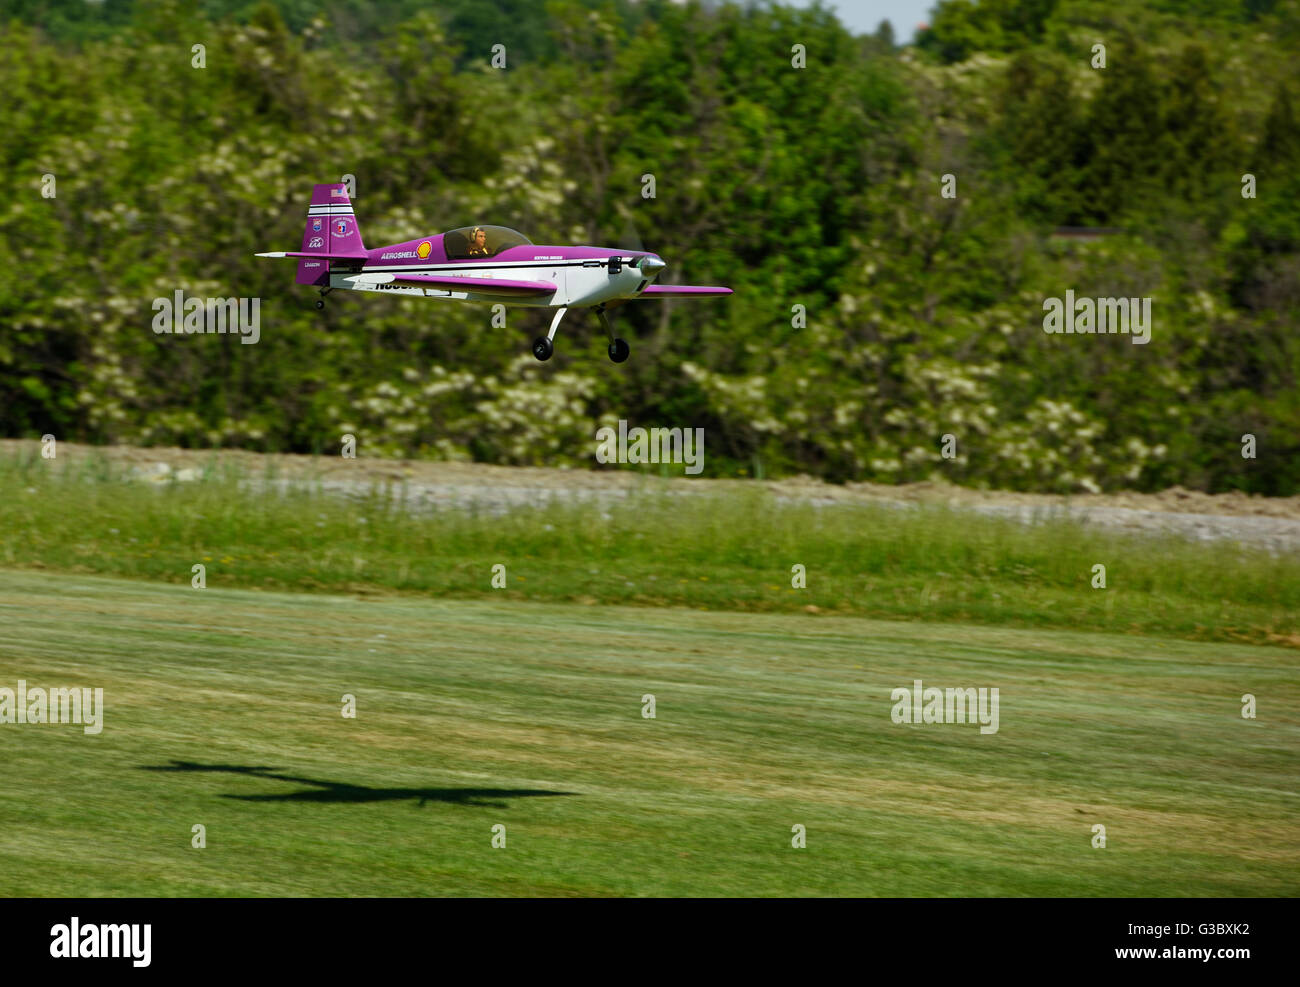 Single Prop radio controlled scale model aircraft landing on a grass runway Stock Photo